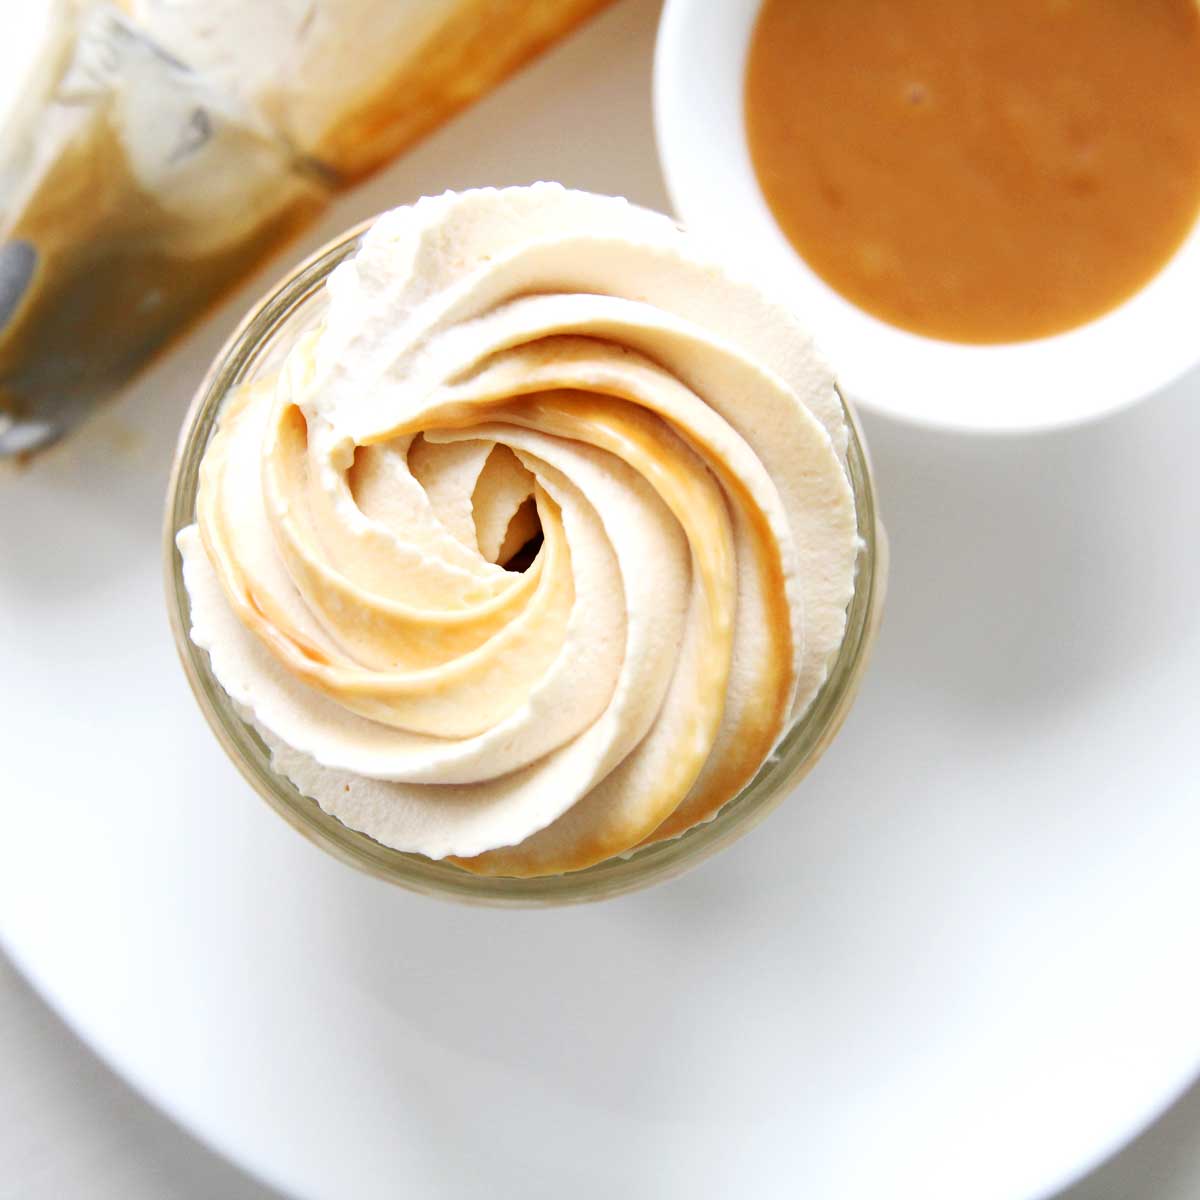 Swirled Caramel Whipped Cream Recipe Perfect for Coffee, Cakes and More - Peppermint Whipped Cream